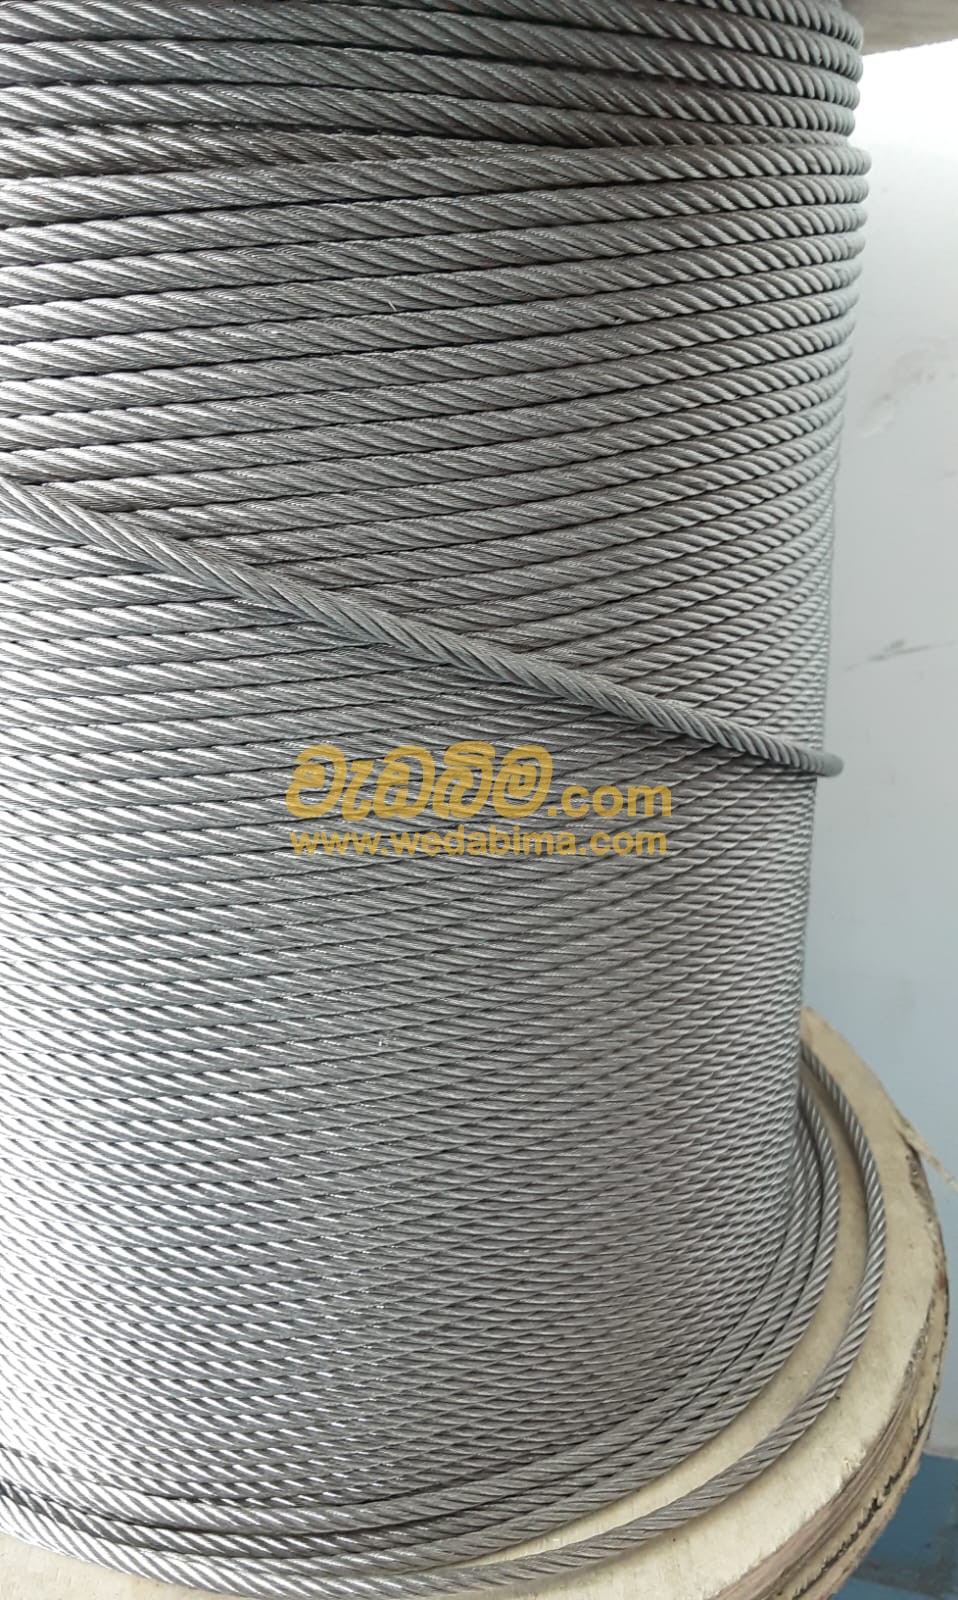 Cover image for 5 mm stainless steel cable price in sri lanka